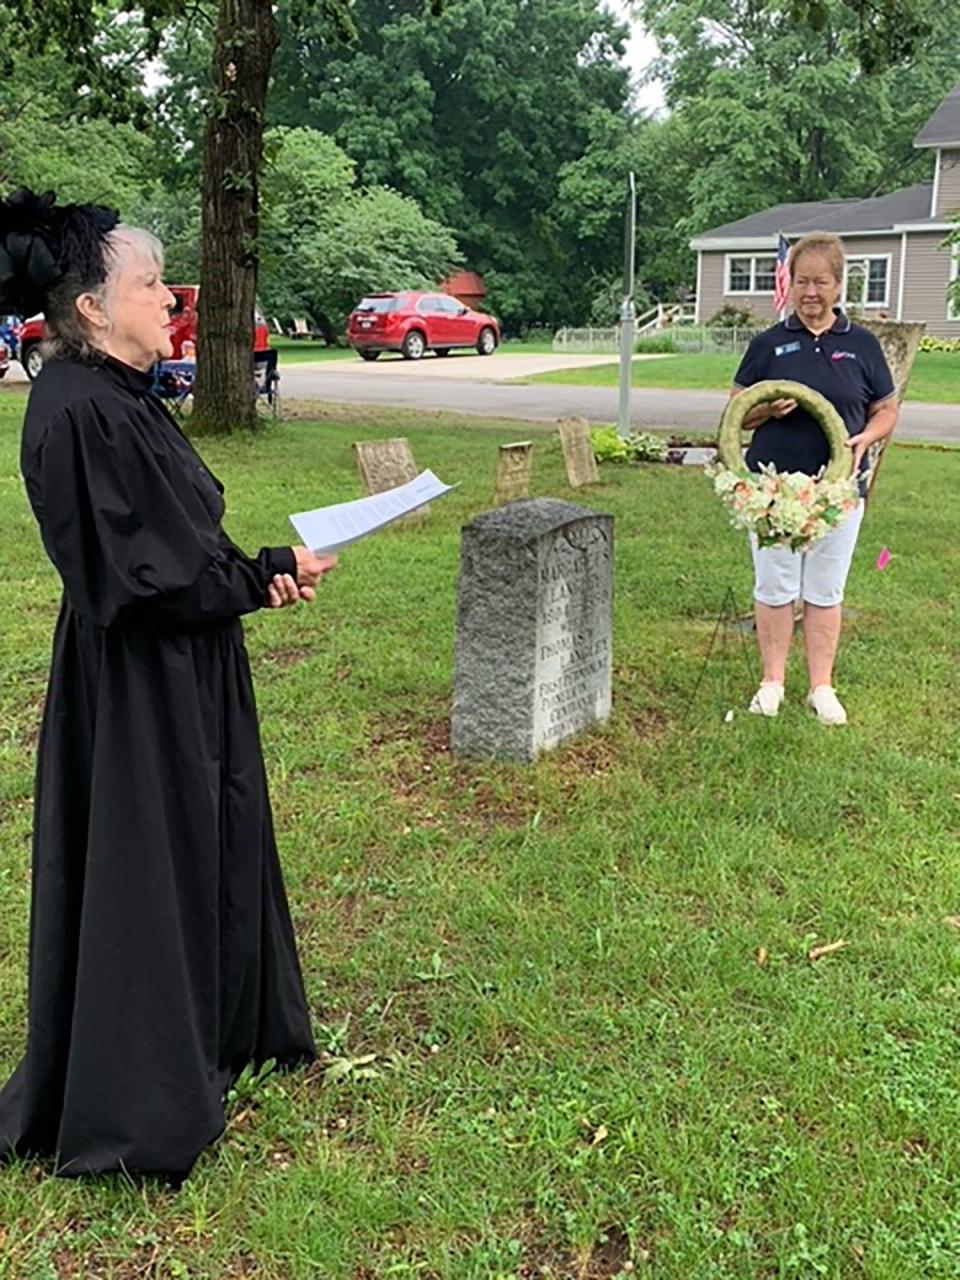 Liz Campbell and Jo Cherry, members of Amos Sturgis chapter of Daughters of the American Revolution, prepare to a lay a wreath at the gravesite of Centreville pioneer Margaret Langley during a ceremony at Old Centreville Cemetery.